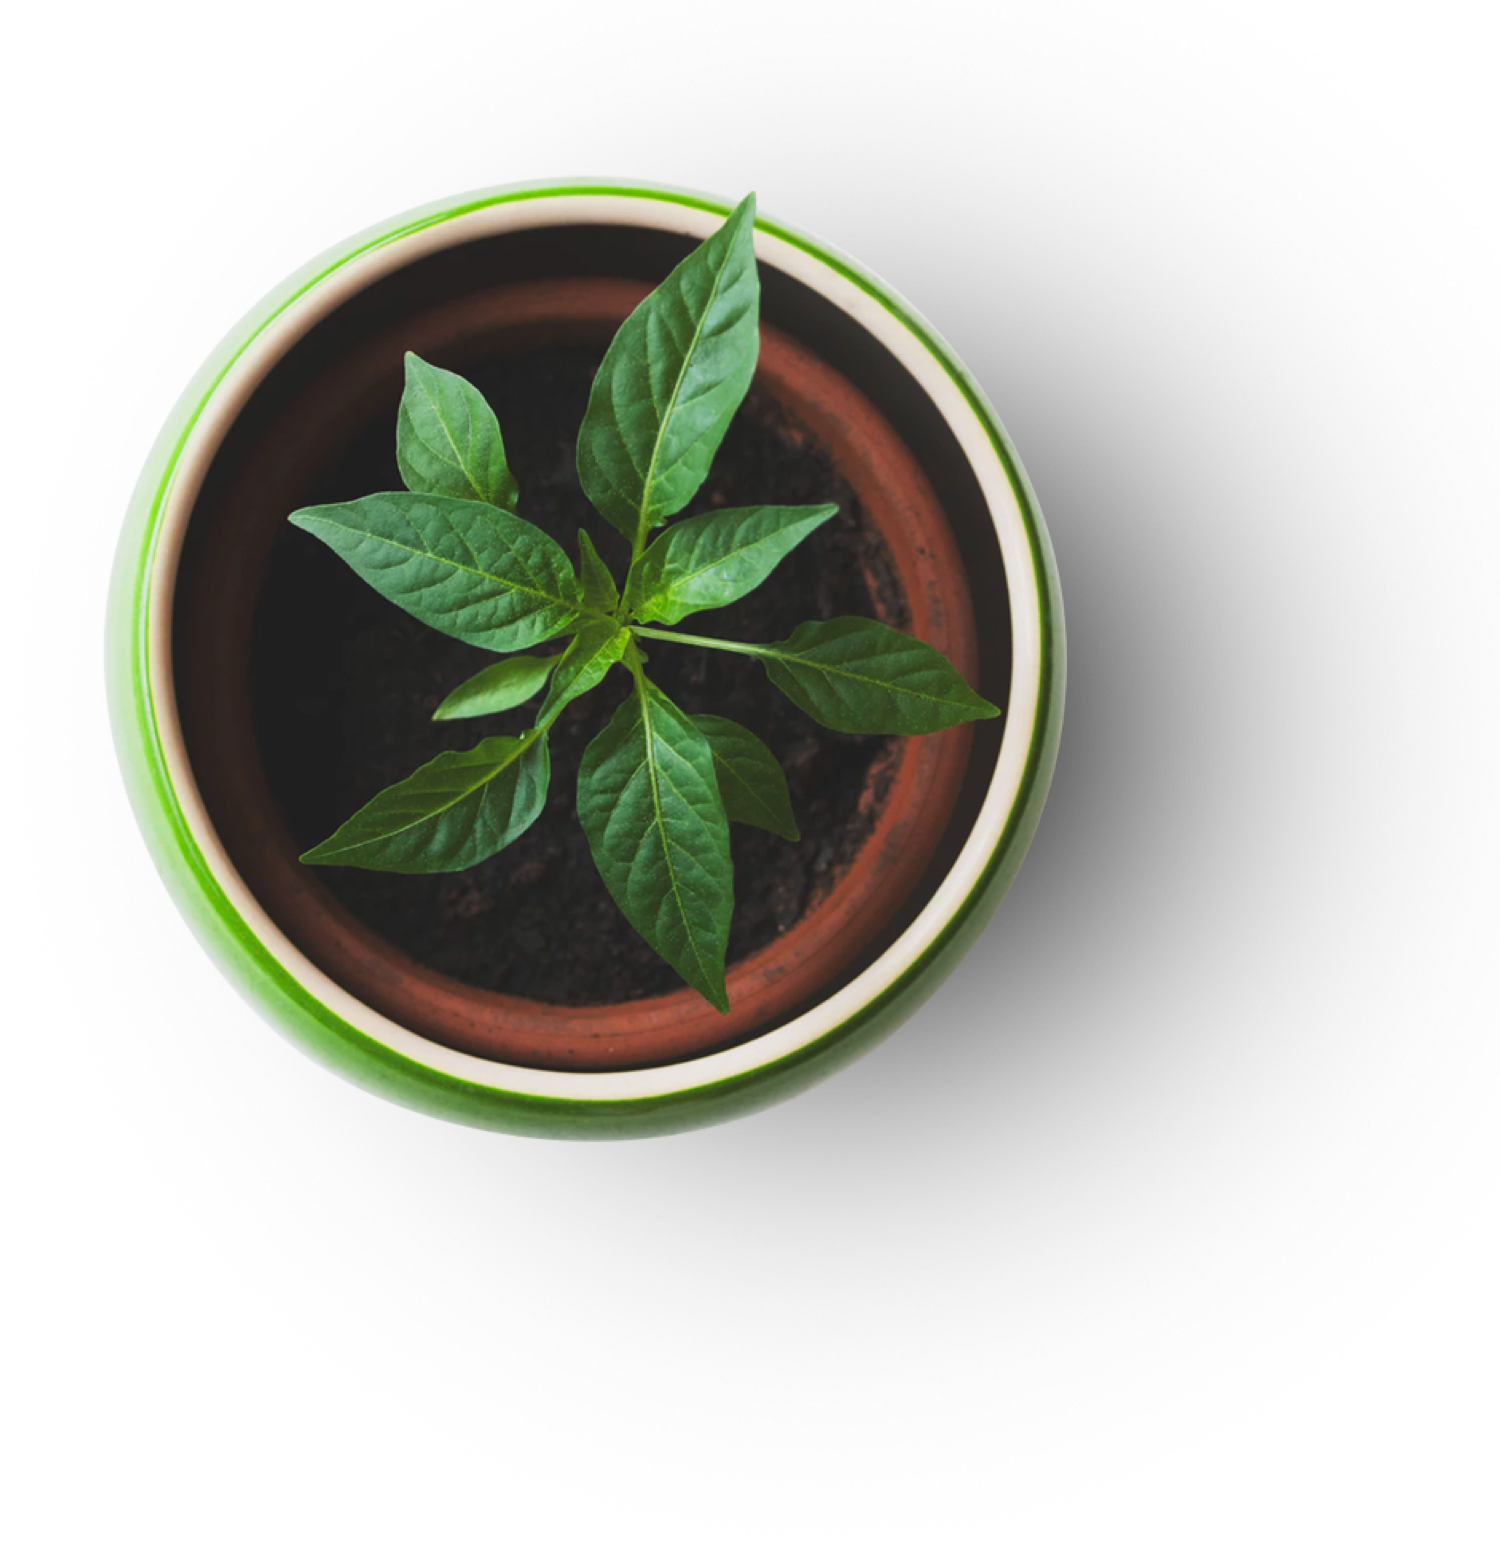 Plant Image with Pot